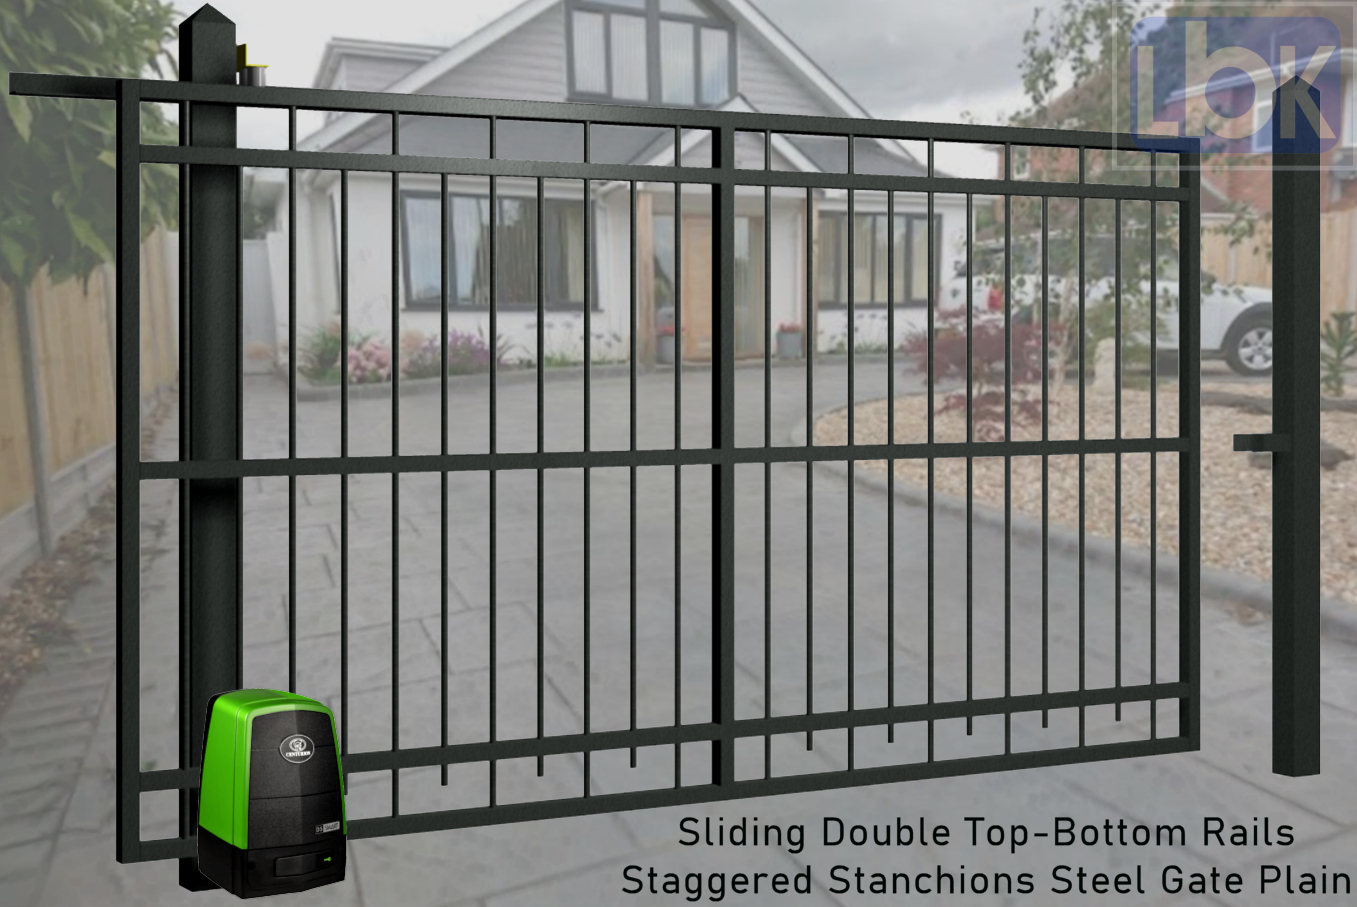 05a Sliding Double Top-Bottom Rails, Staggered Stanchions Steel Gate Plain